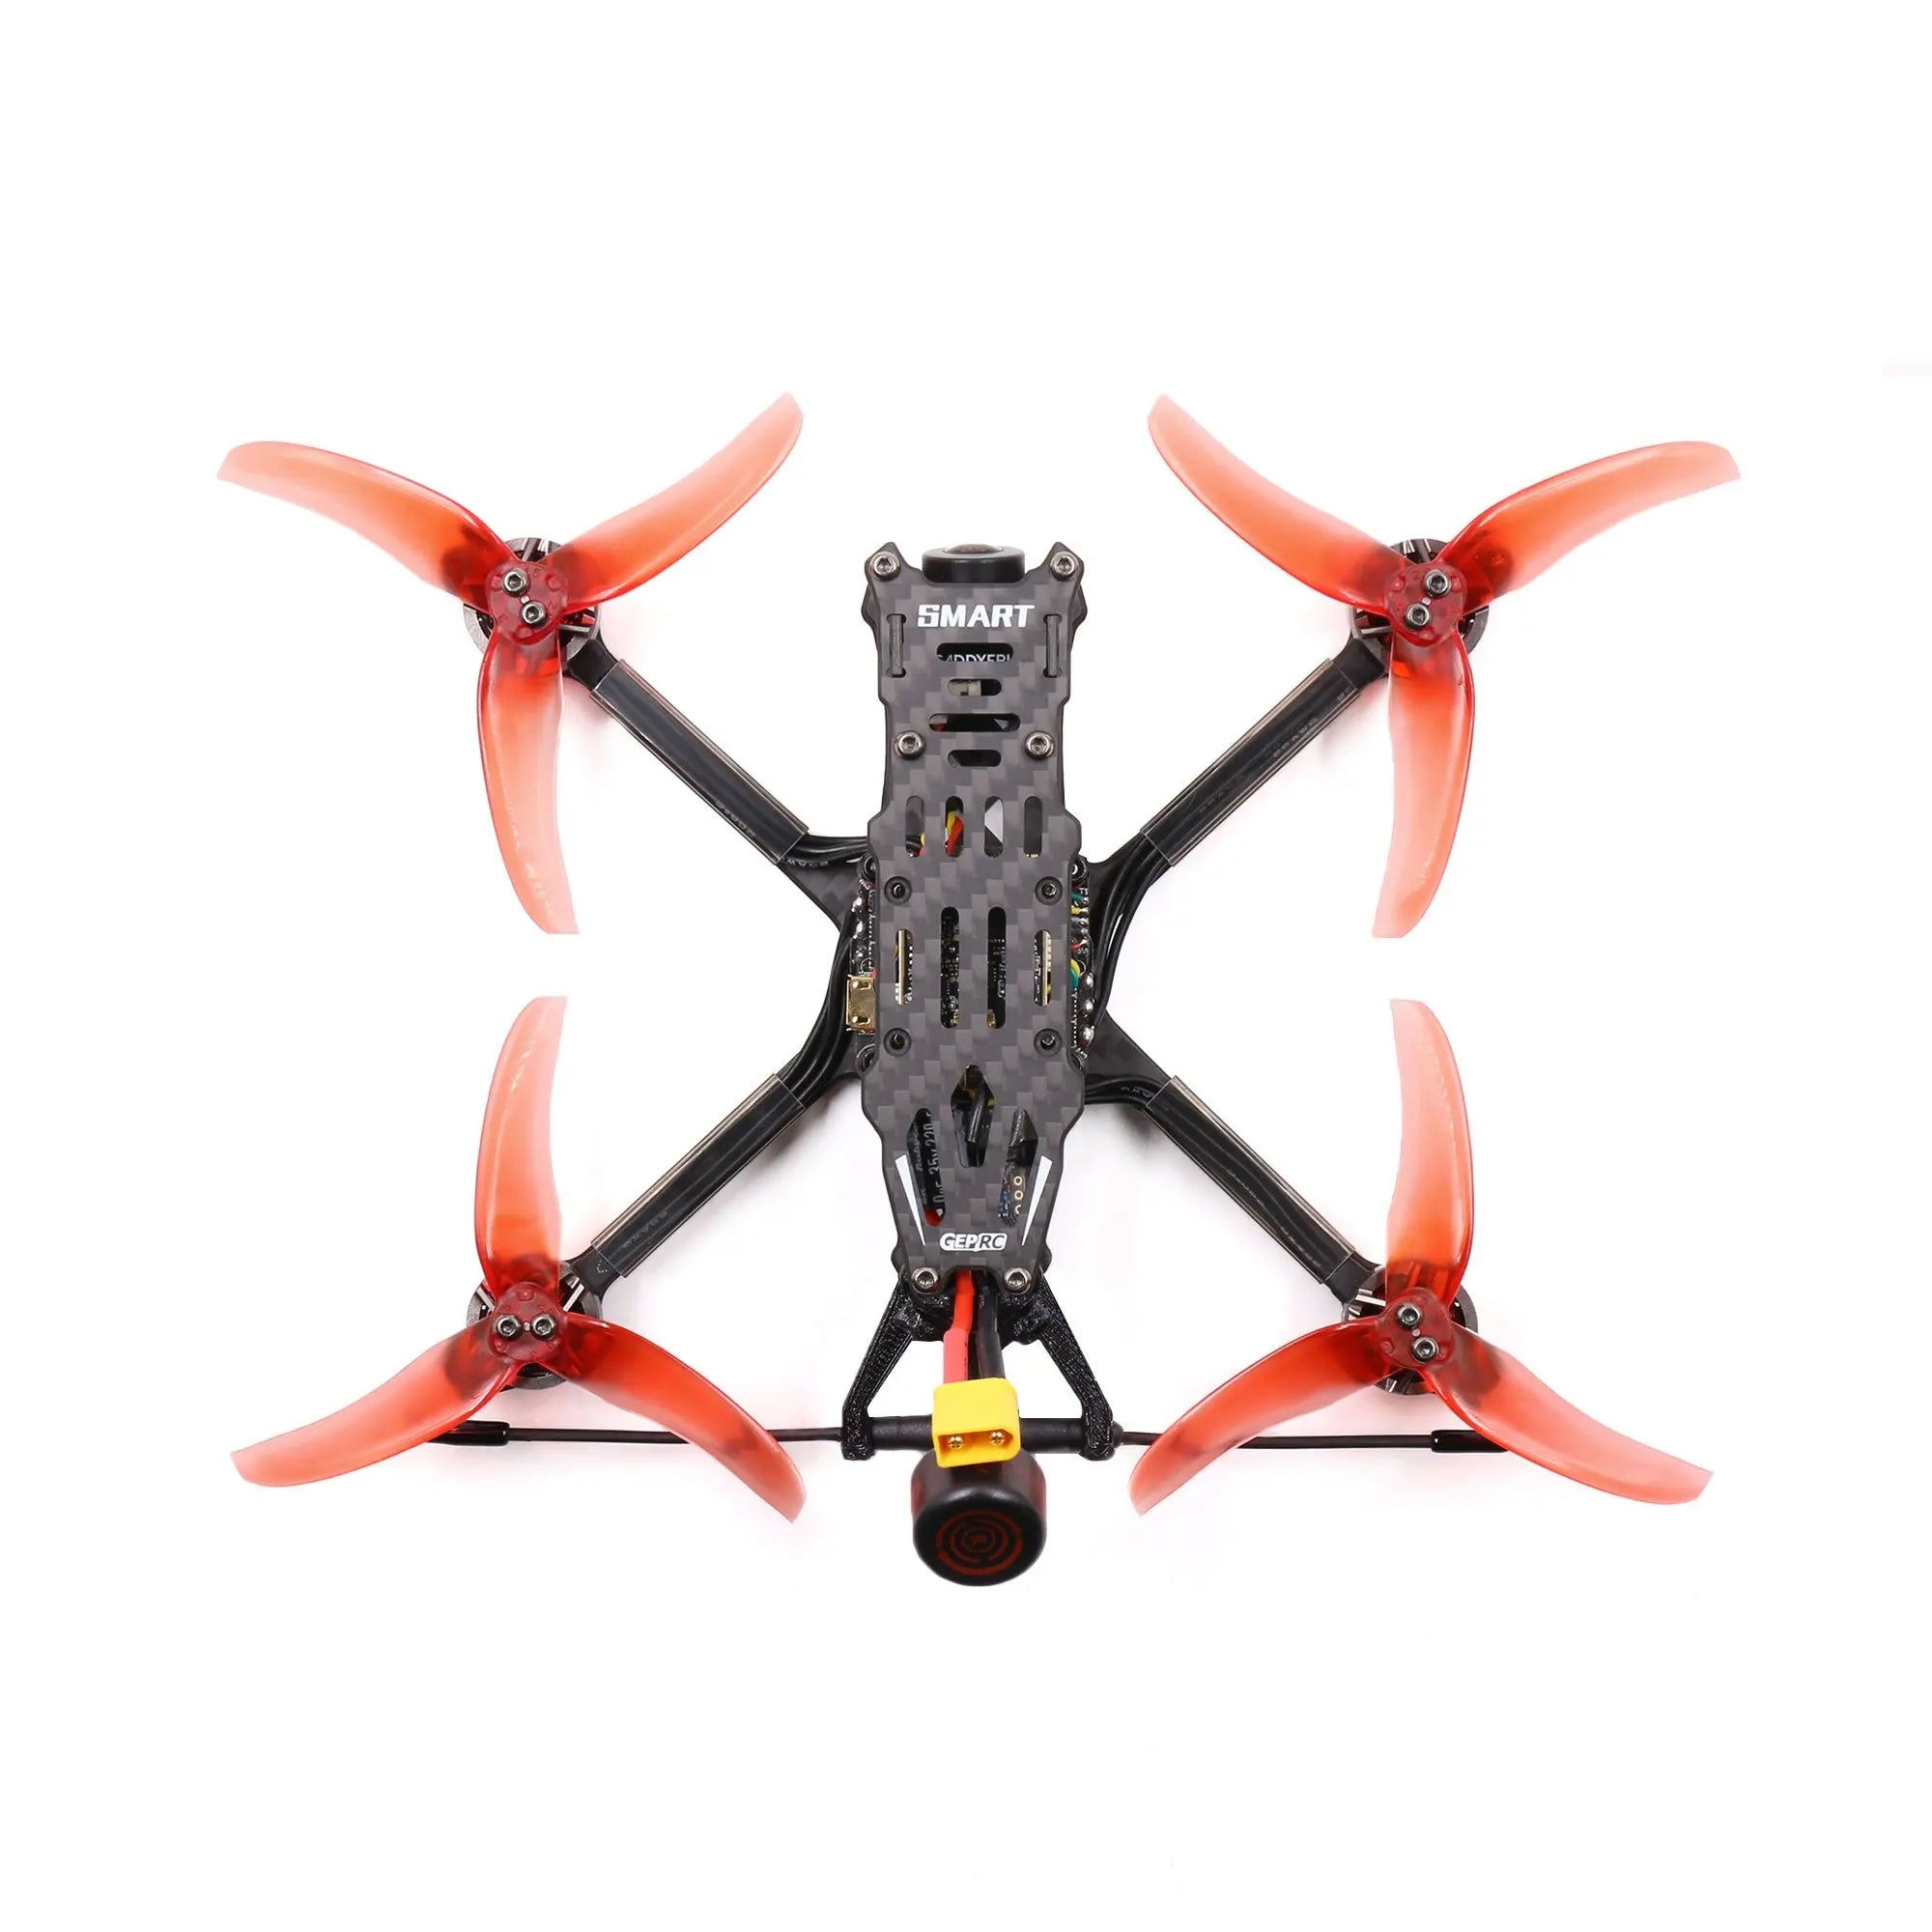 GEPRC SMART 35 FPV Drone, GoPro Hero8 Naked Camera 3D Print Mount, which can carry GoPro6 